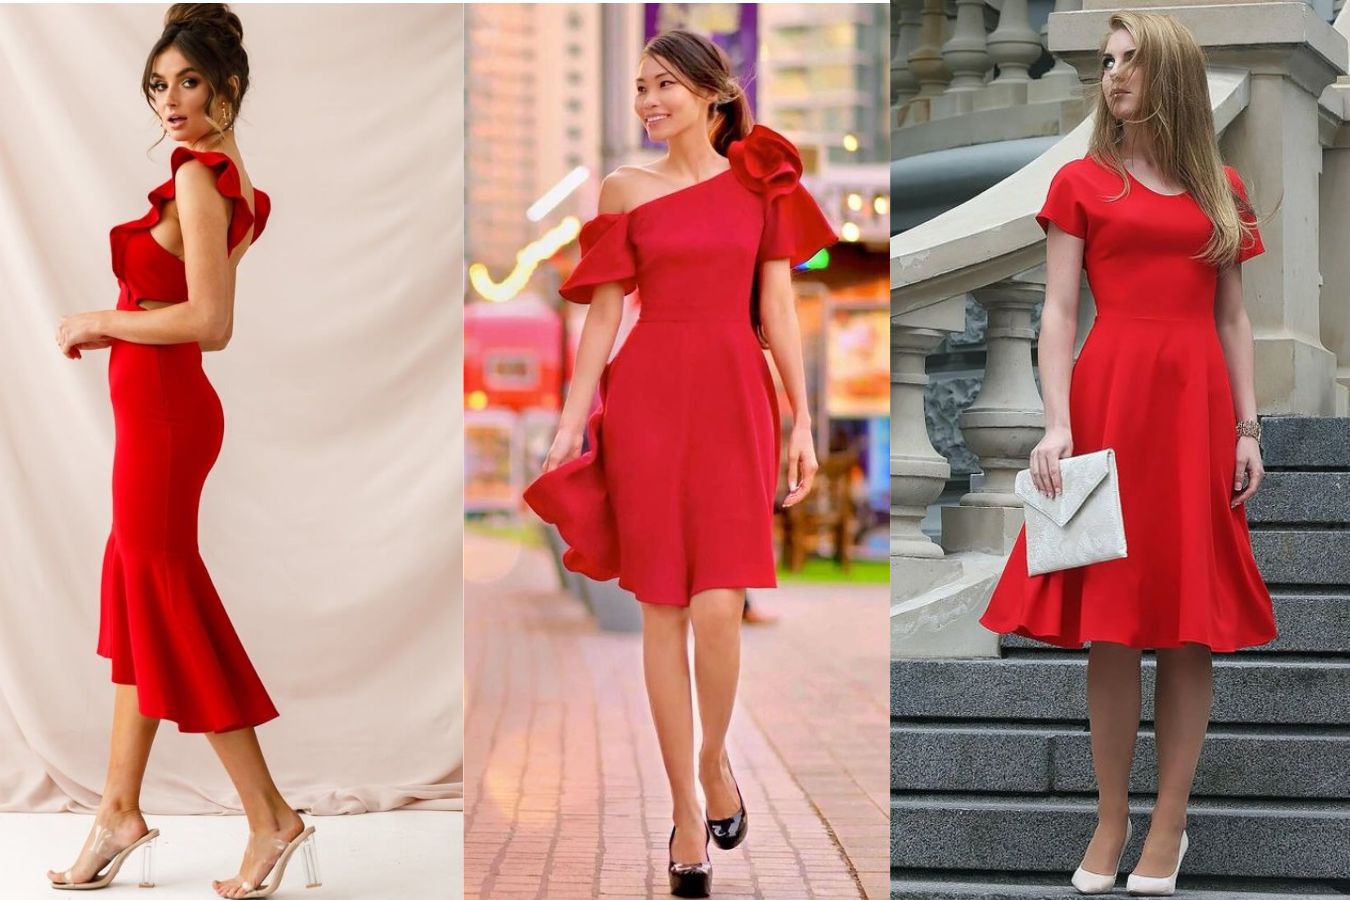 What Colors of Shoes Go with a Red Dress